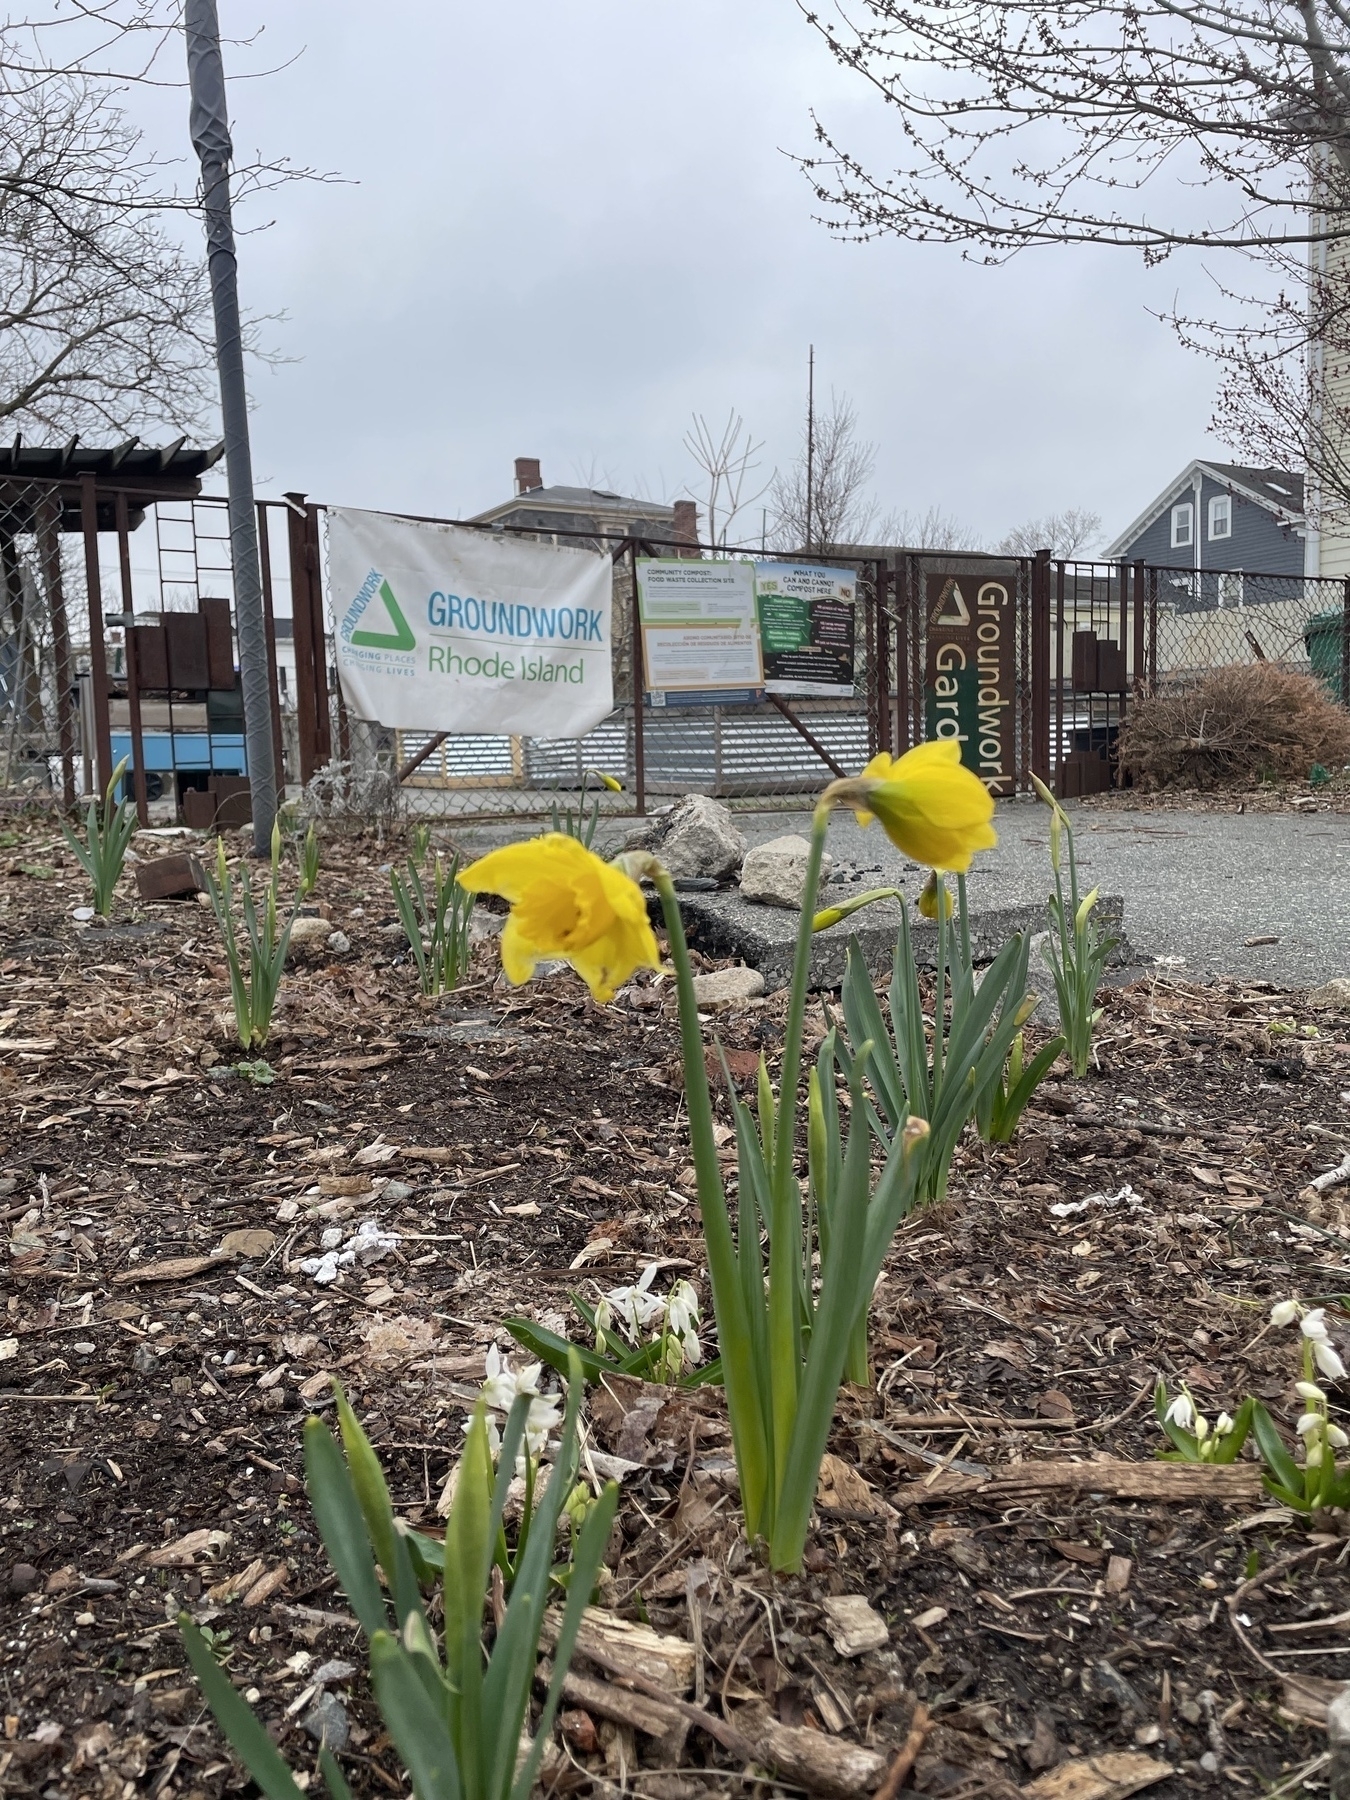 At foot-level, a yellow daffodil grows through some mulch along with other shoots of plants almost ready to bloom. Behind the mulch, a sidewalk path leads to a closed brown metal gate with signs for Groundwork Rhode Island. The top floors of apartment houses are in the background. 